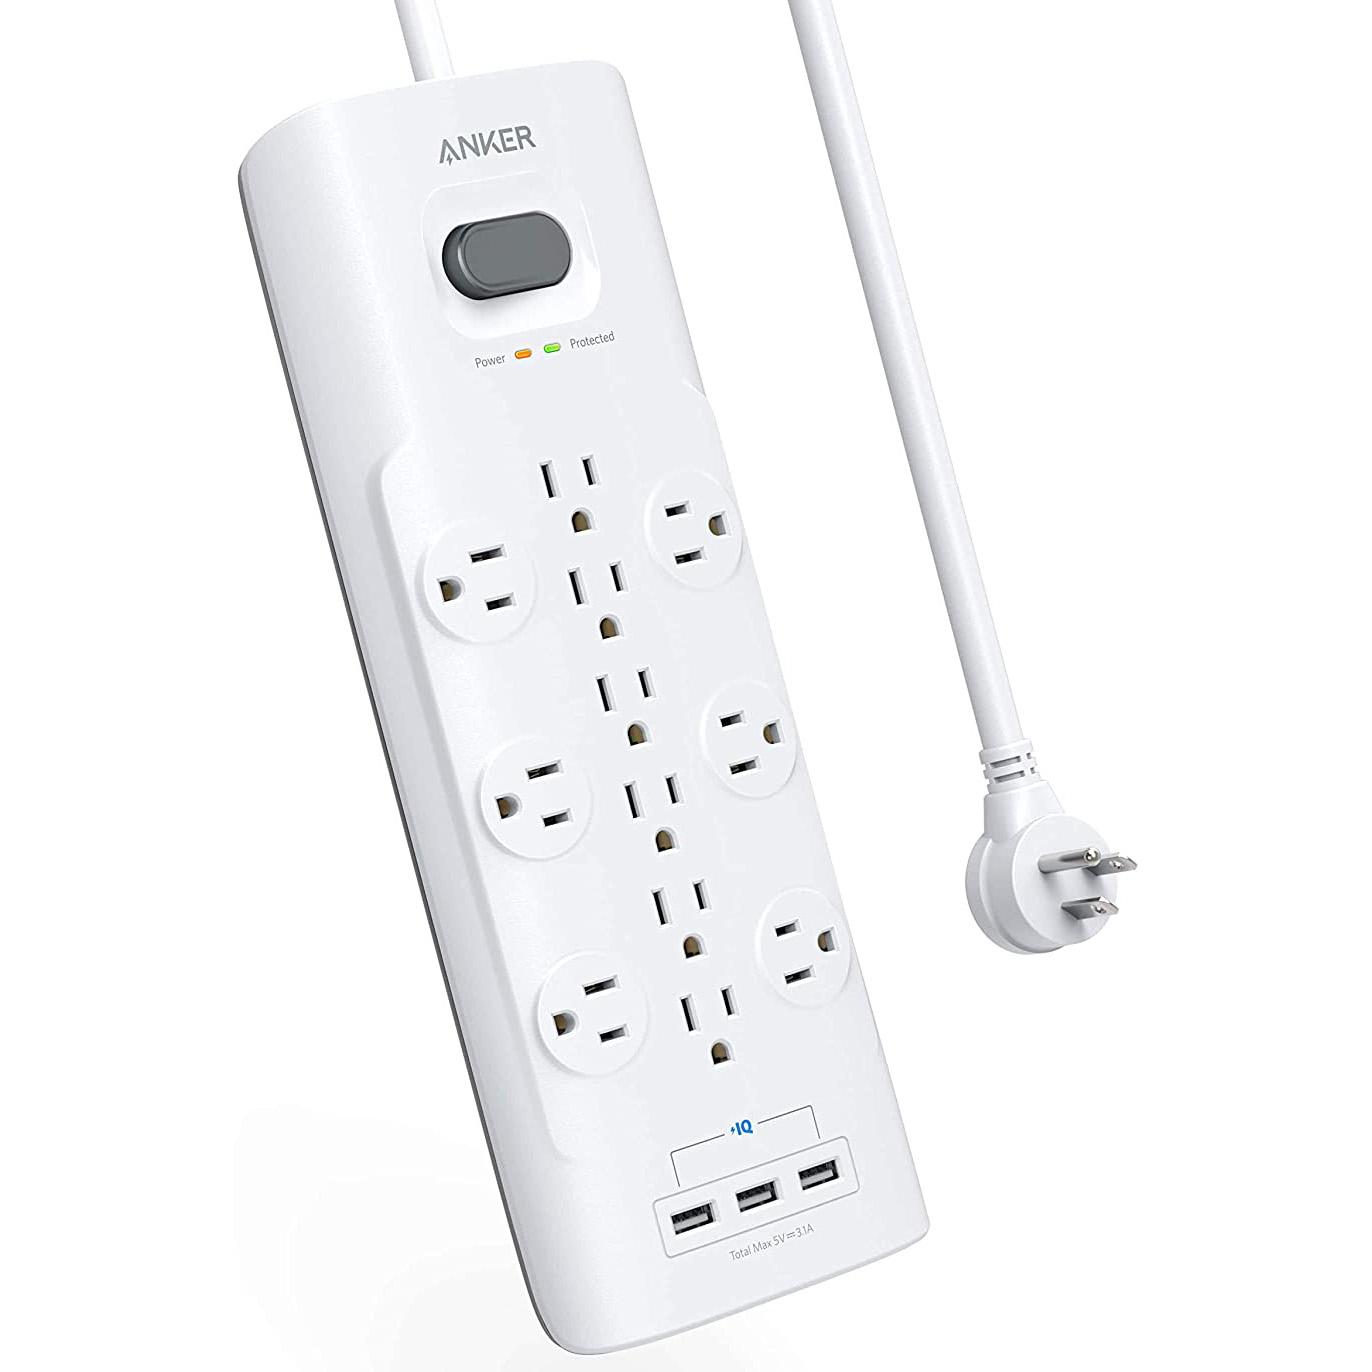 Anker 12 Outlets and 3 USB Ports Surge Protector for $24.64